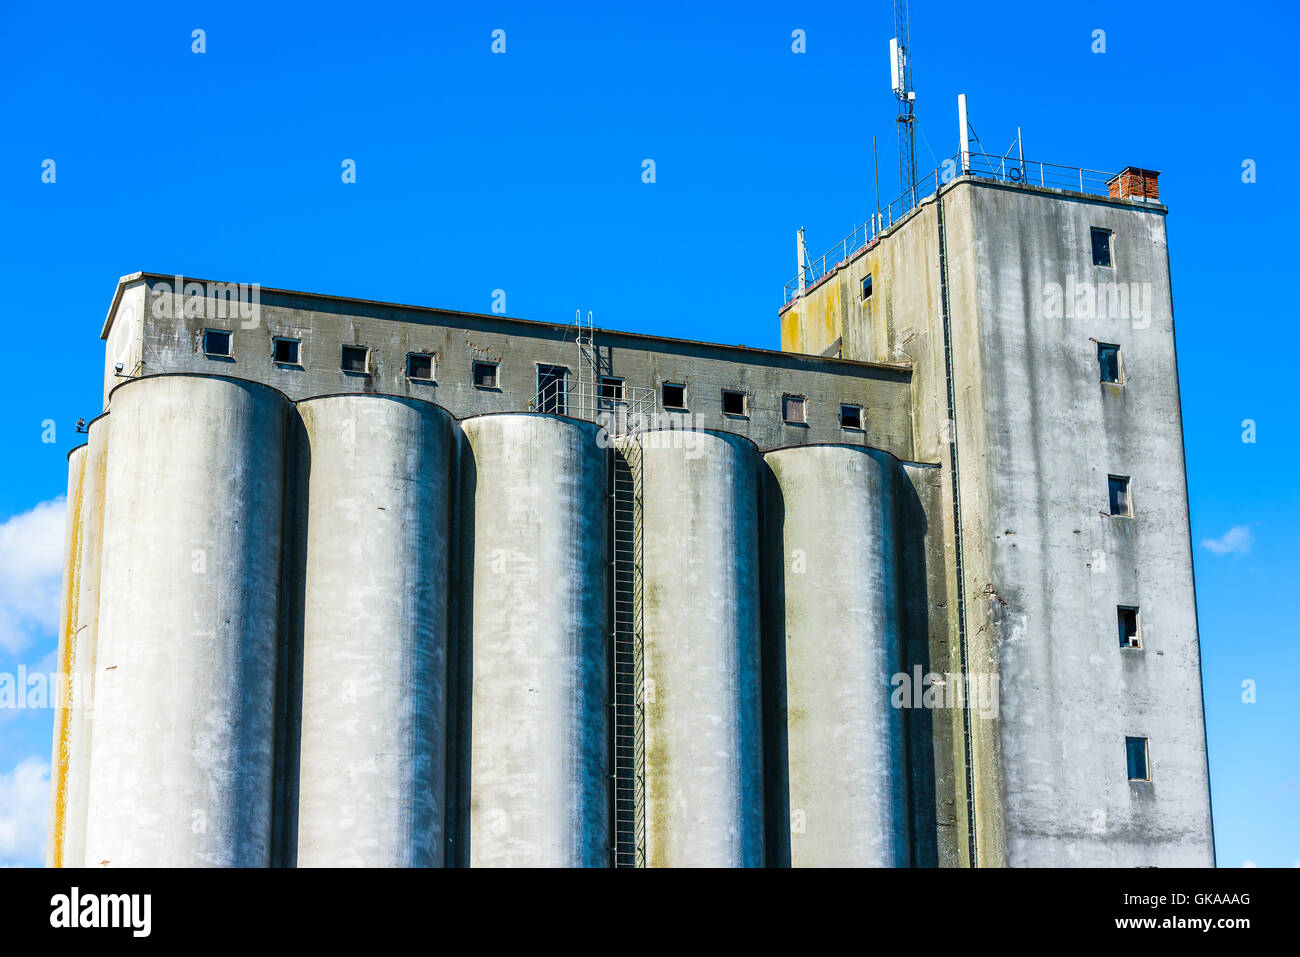 Bergkvara, Sweden - August 10, 2016: The old and abandoned grain silo down  by the harbor Stock Photo - Alamy